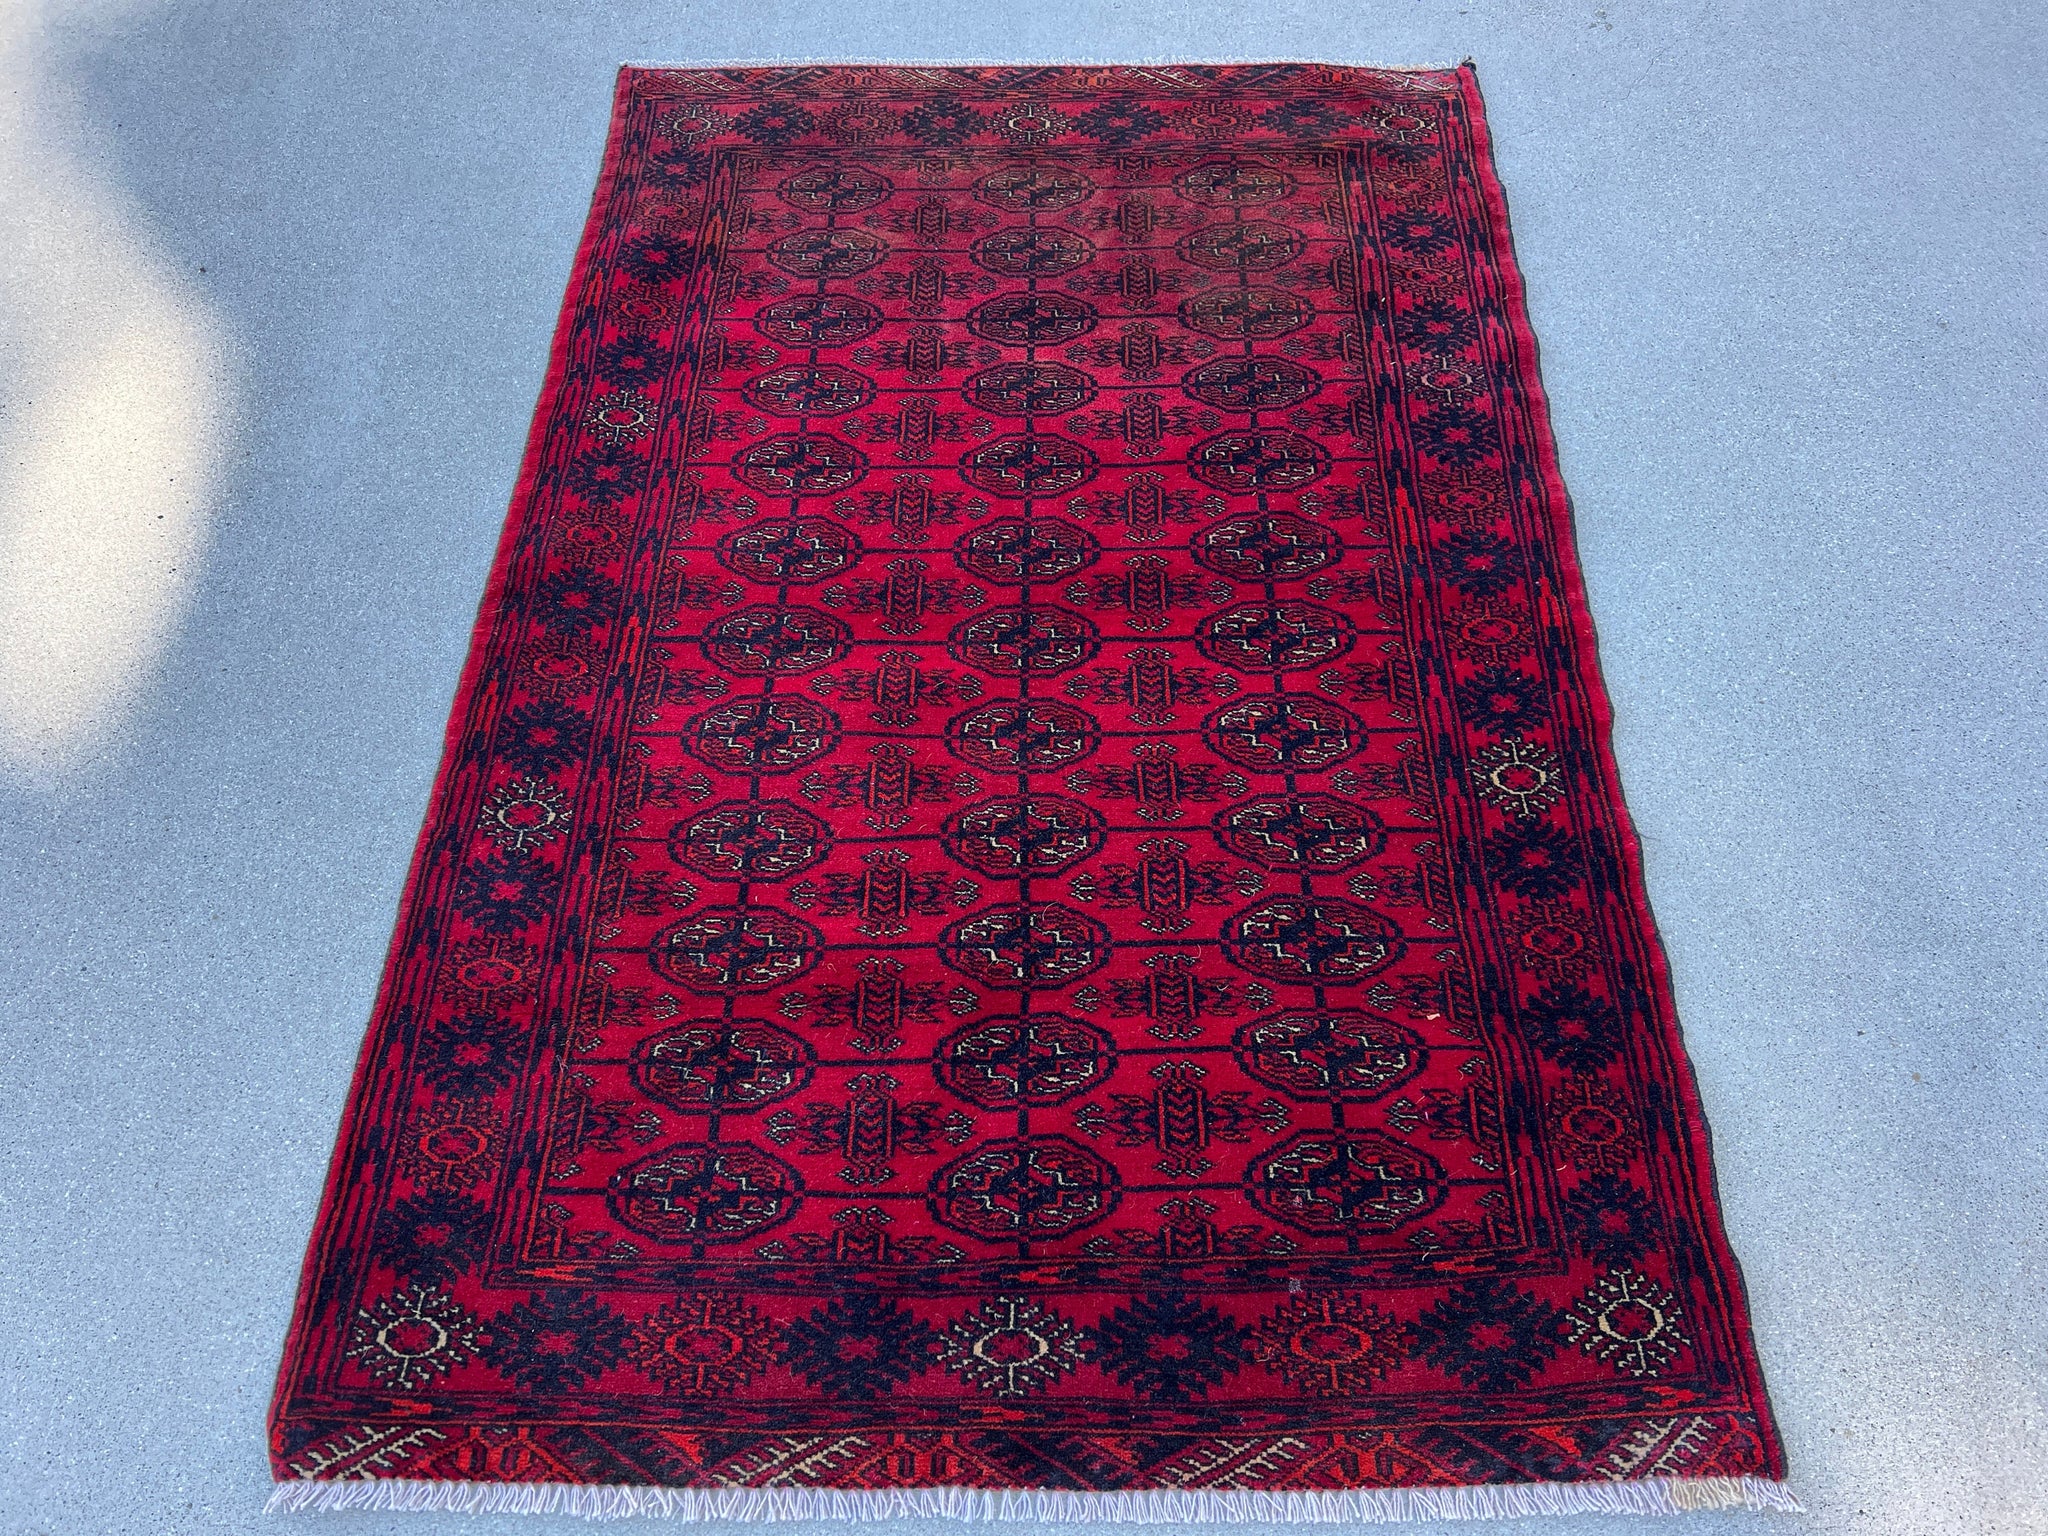 Azariah - 4x6 Area Rug - The Rug Mine - Free Shipping Worldwide - Authentic  Oriental Rugs